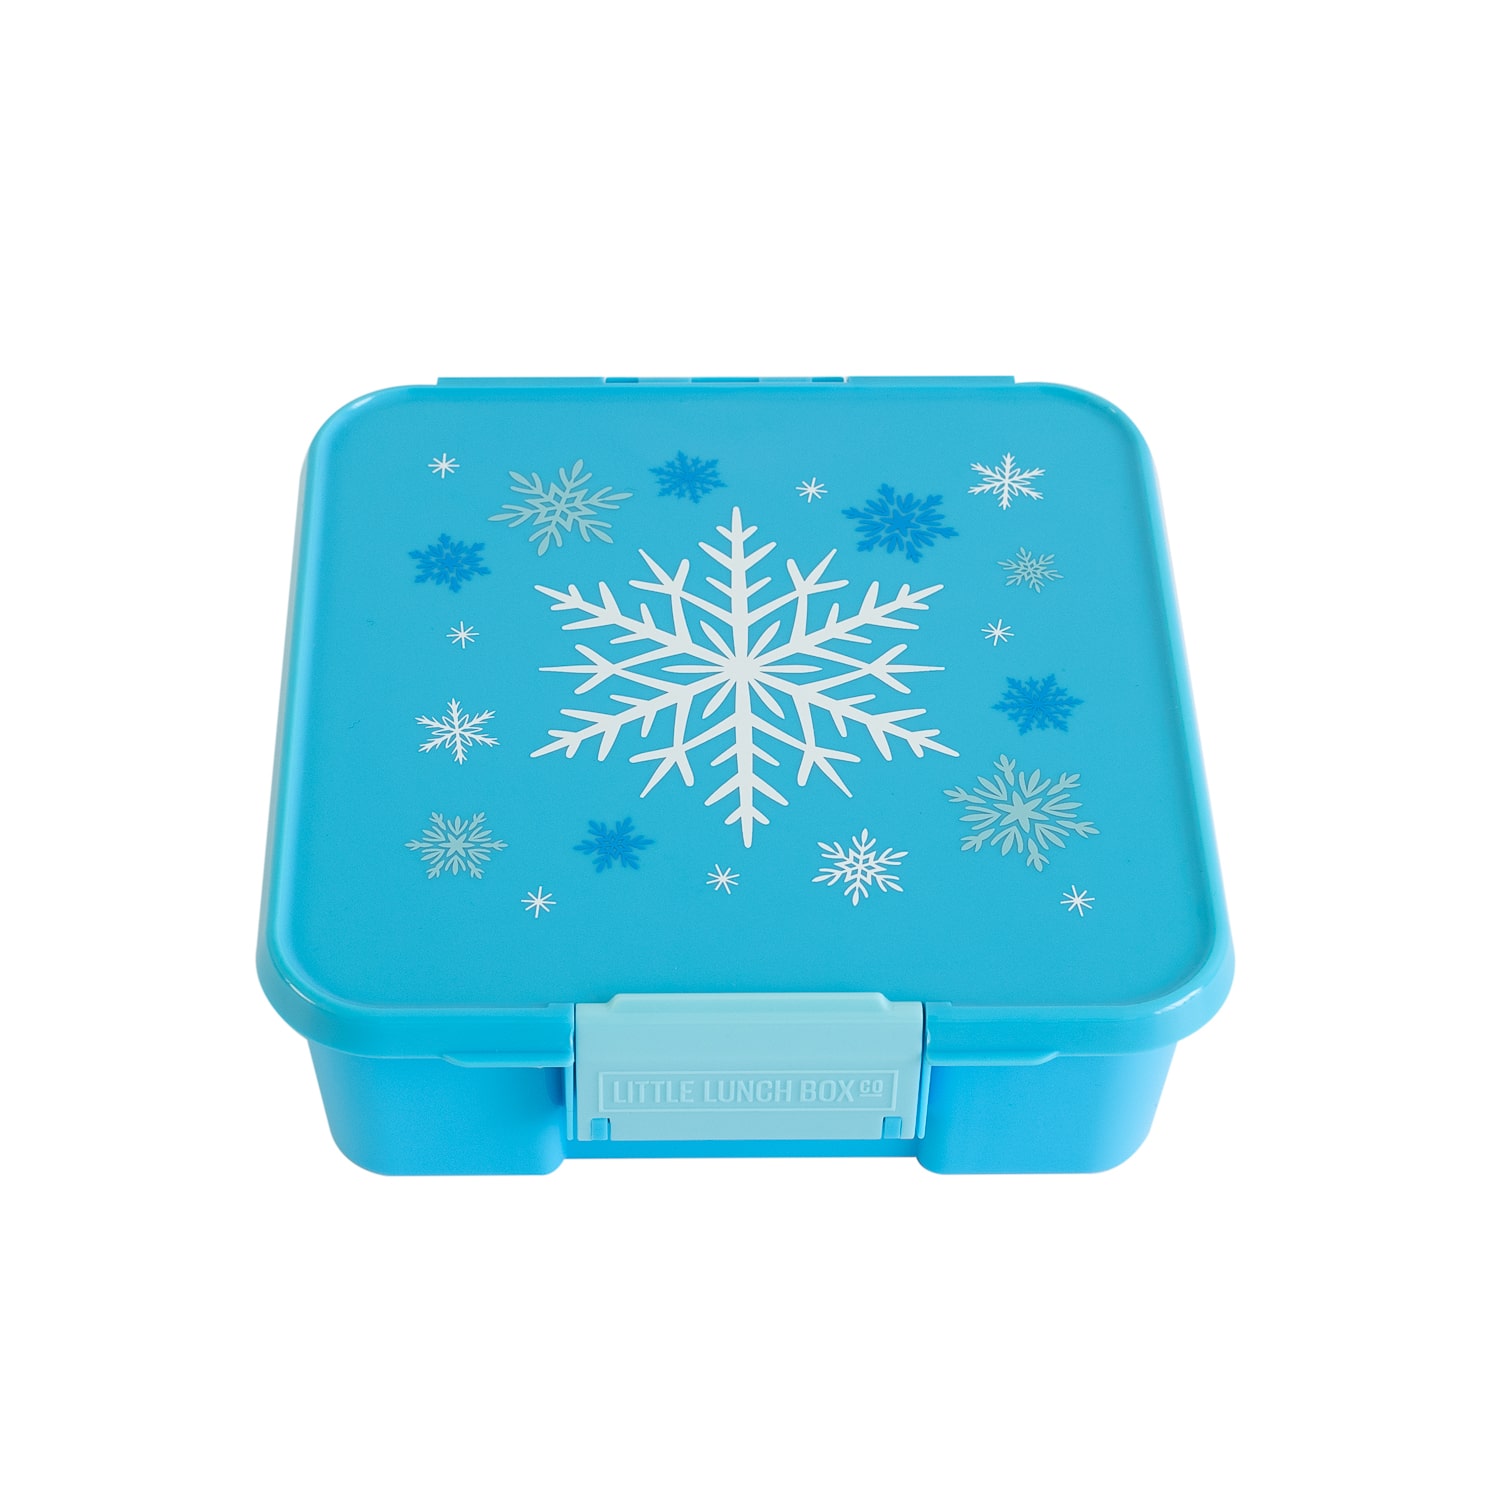 Little Lunch Box Co – Bento 3 Snowflakes